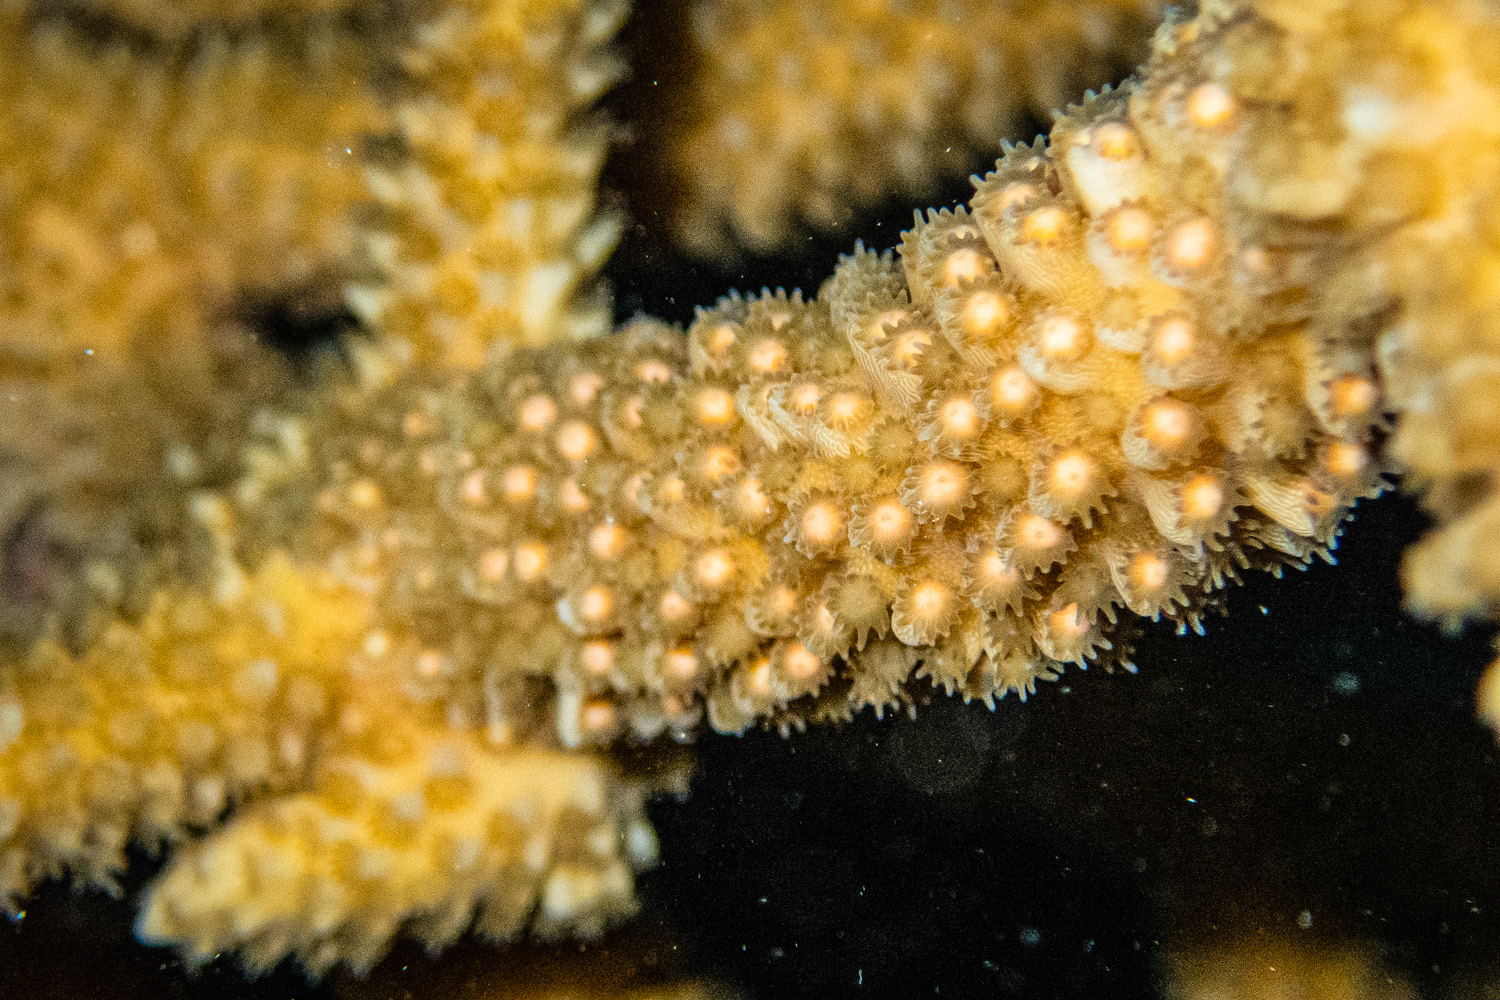 Staghorn coral spawning, A close-up view of staghorn coral …